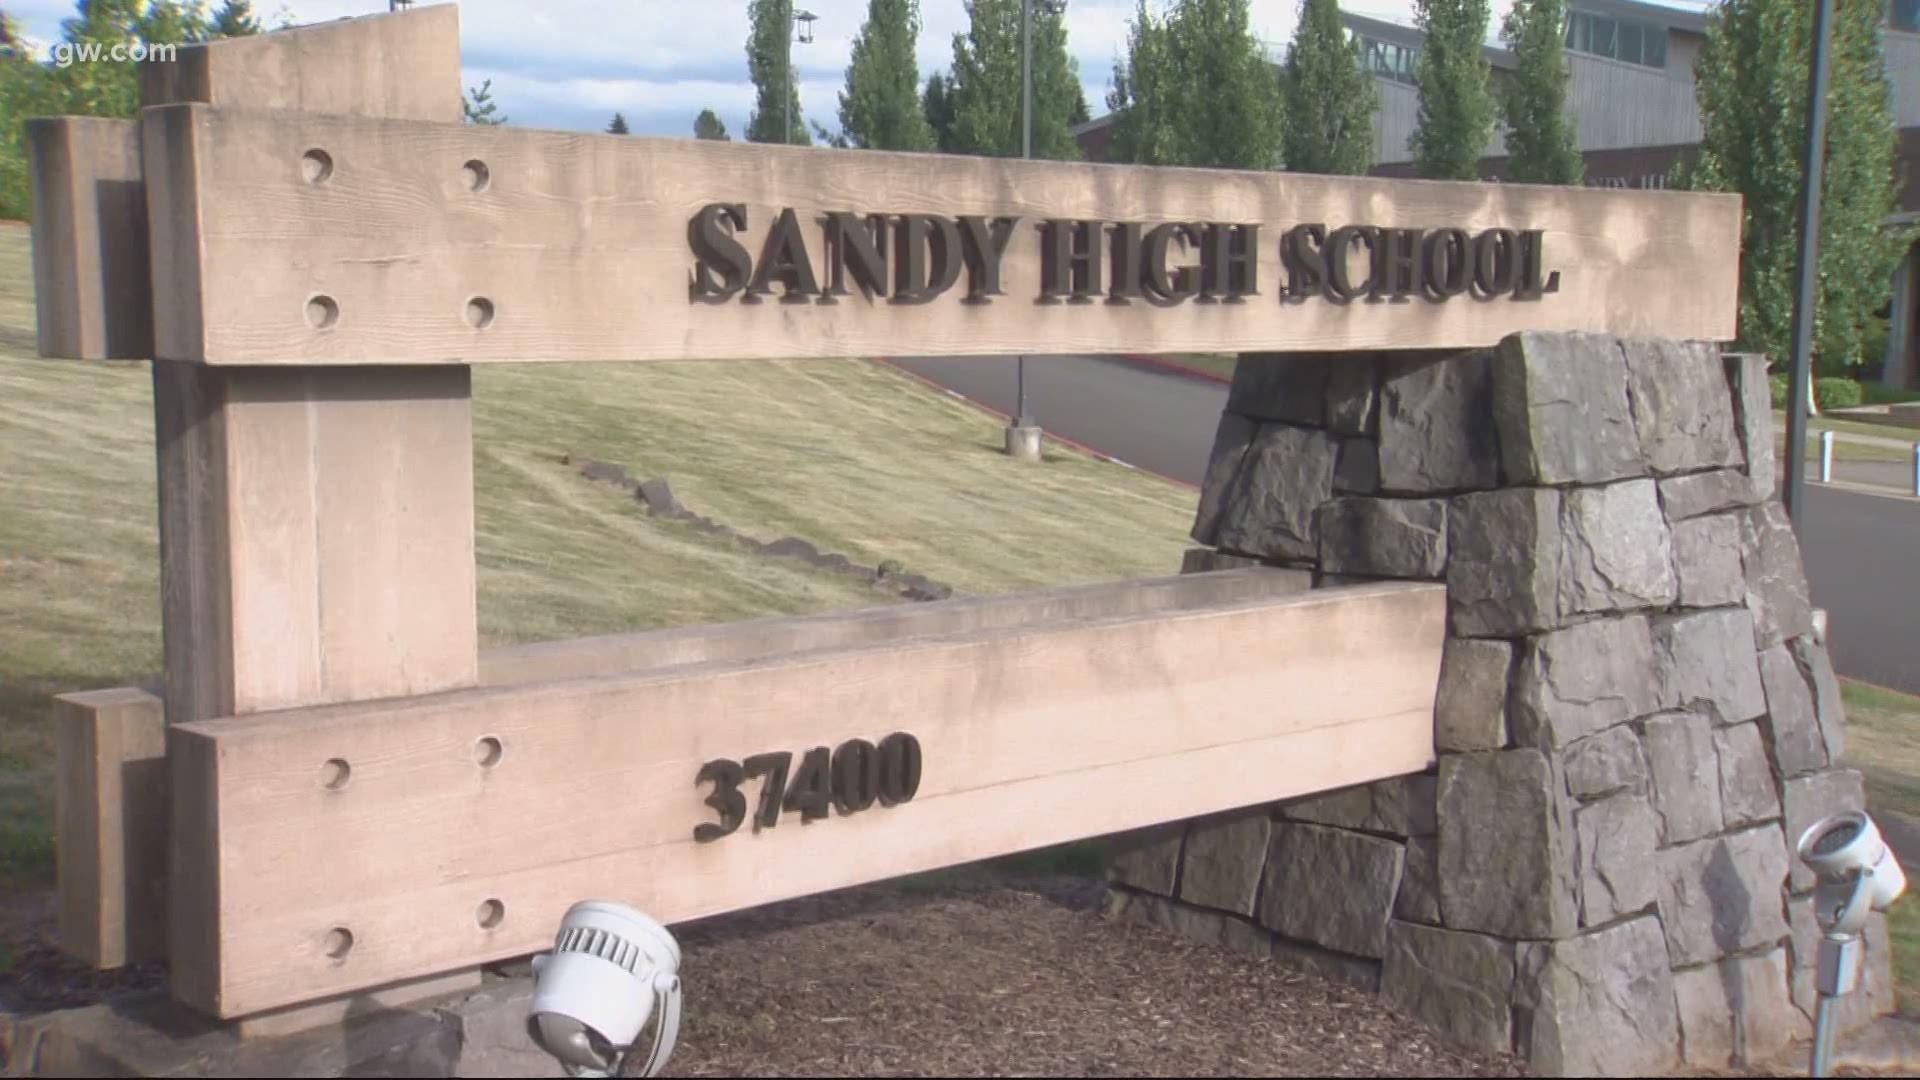 Students have started an online petition to ban the Confederate flag, which they say has a large presence at Sandy High School.